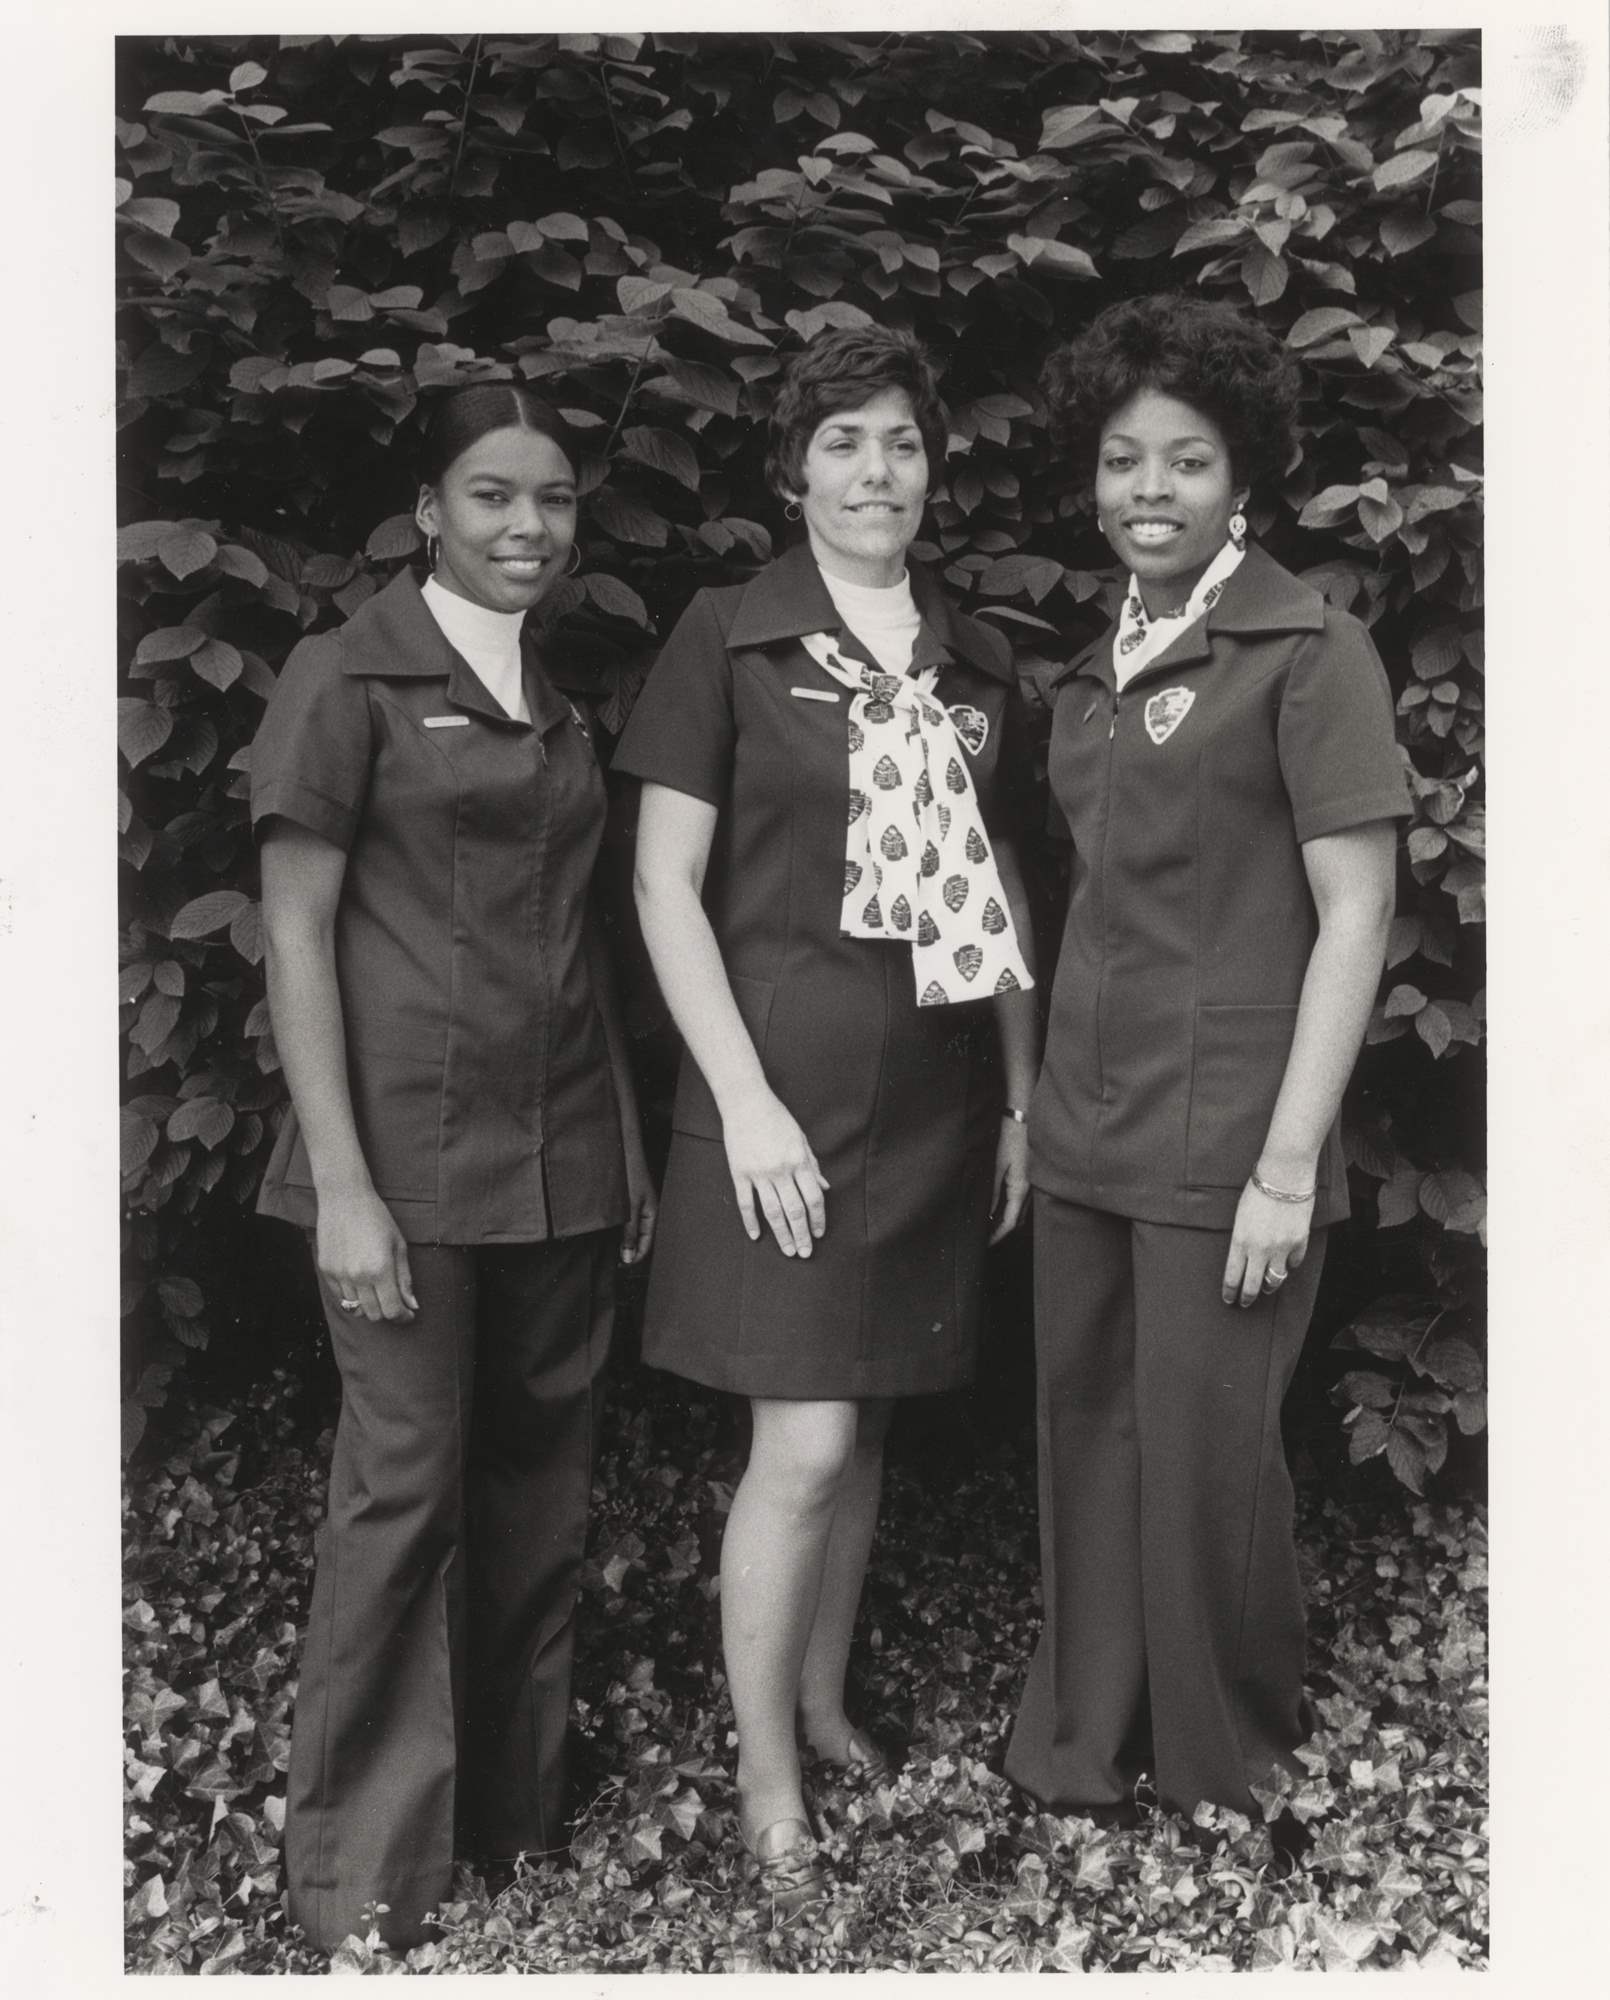 Three women pose in NPS uniforms. Two wear pantsuits and one a dress. The uniforms have arrowhead patches instead of ranger badges.